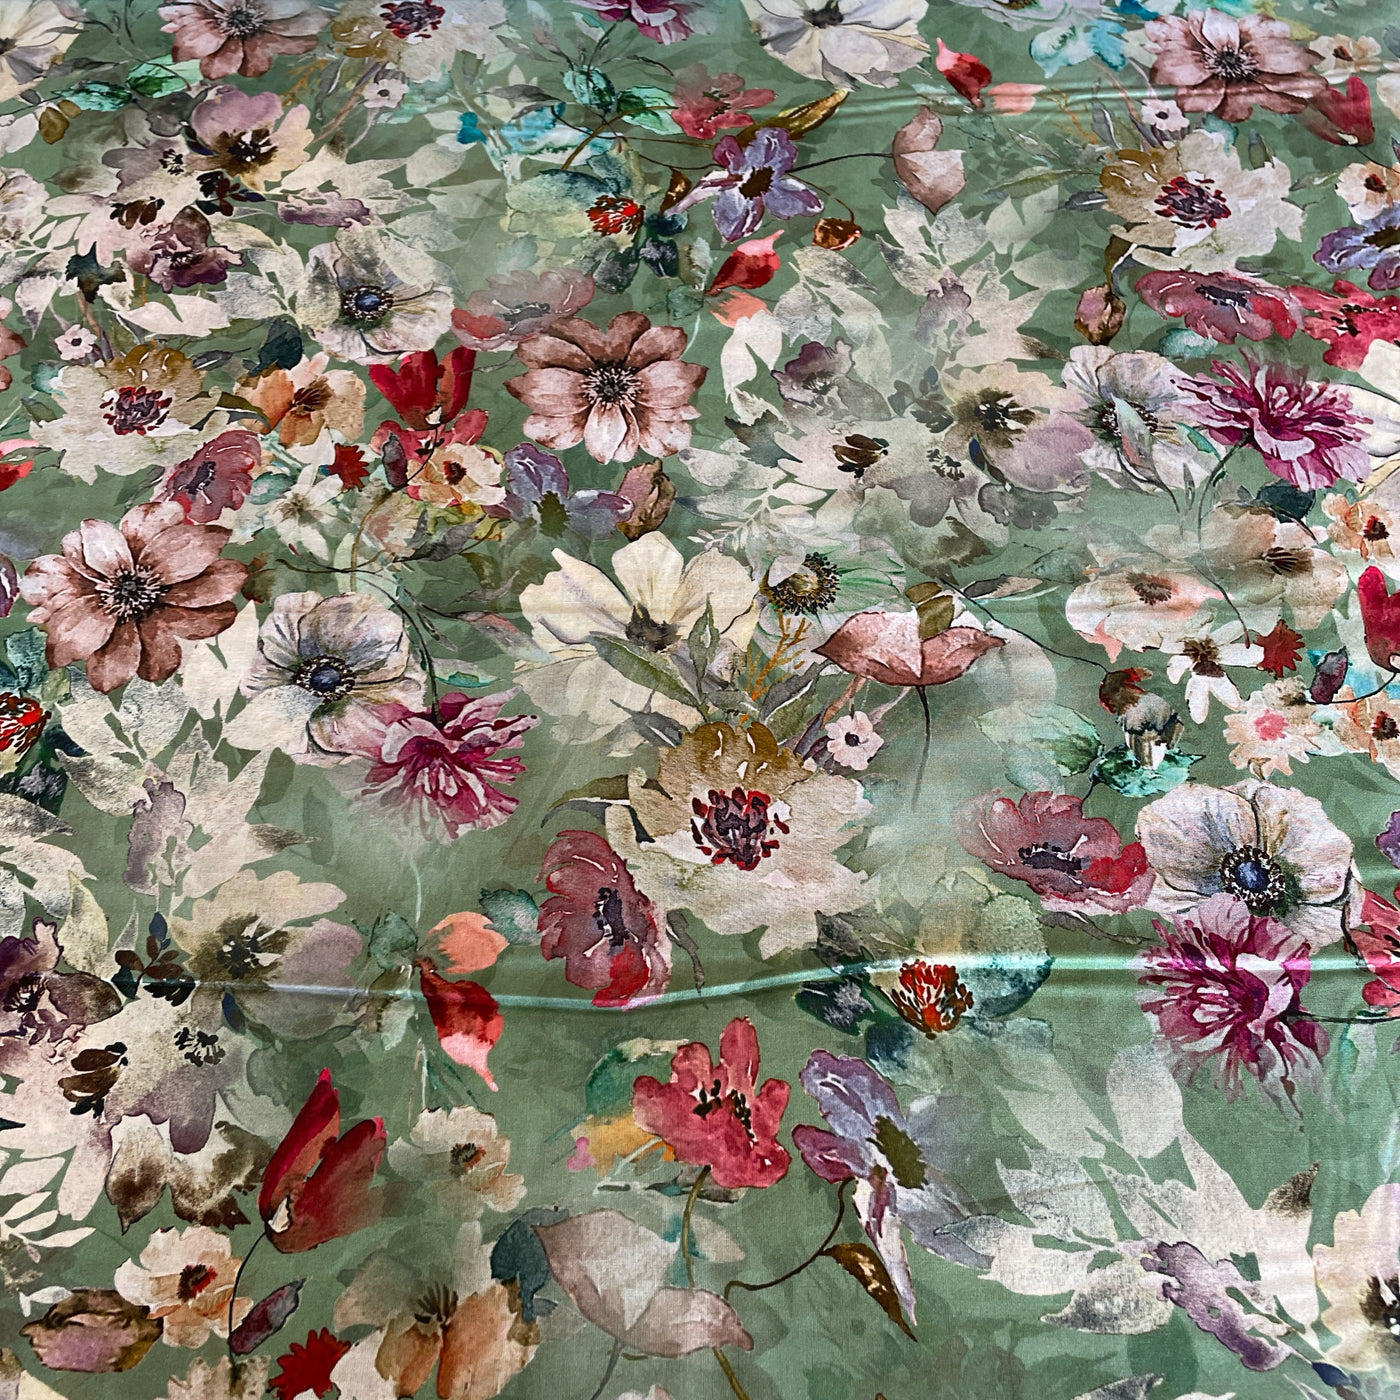 Luxurious sage green Digital Cotton Lawn floral prints are lightweight and soft with beautiful drape – perfect for dresses, blouses, skirts and crafts. At a width of 135cm / 53" and a weight of 75gsm